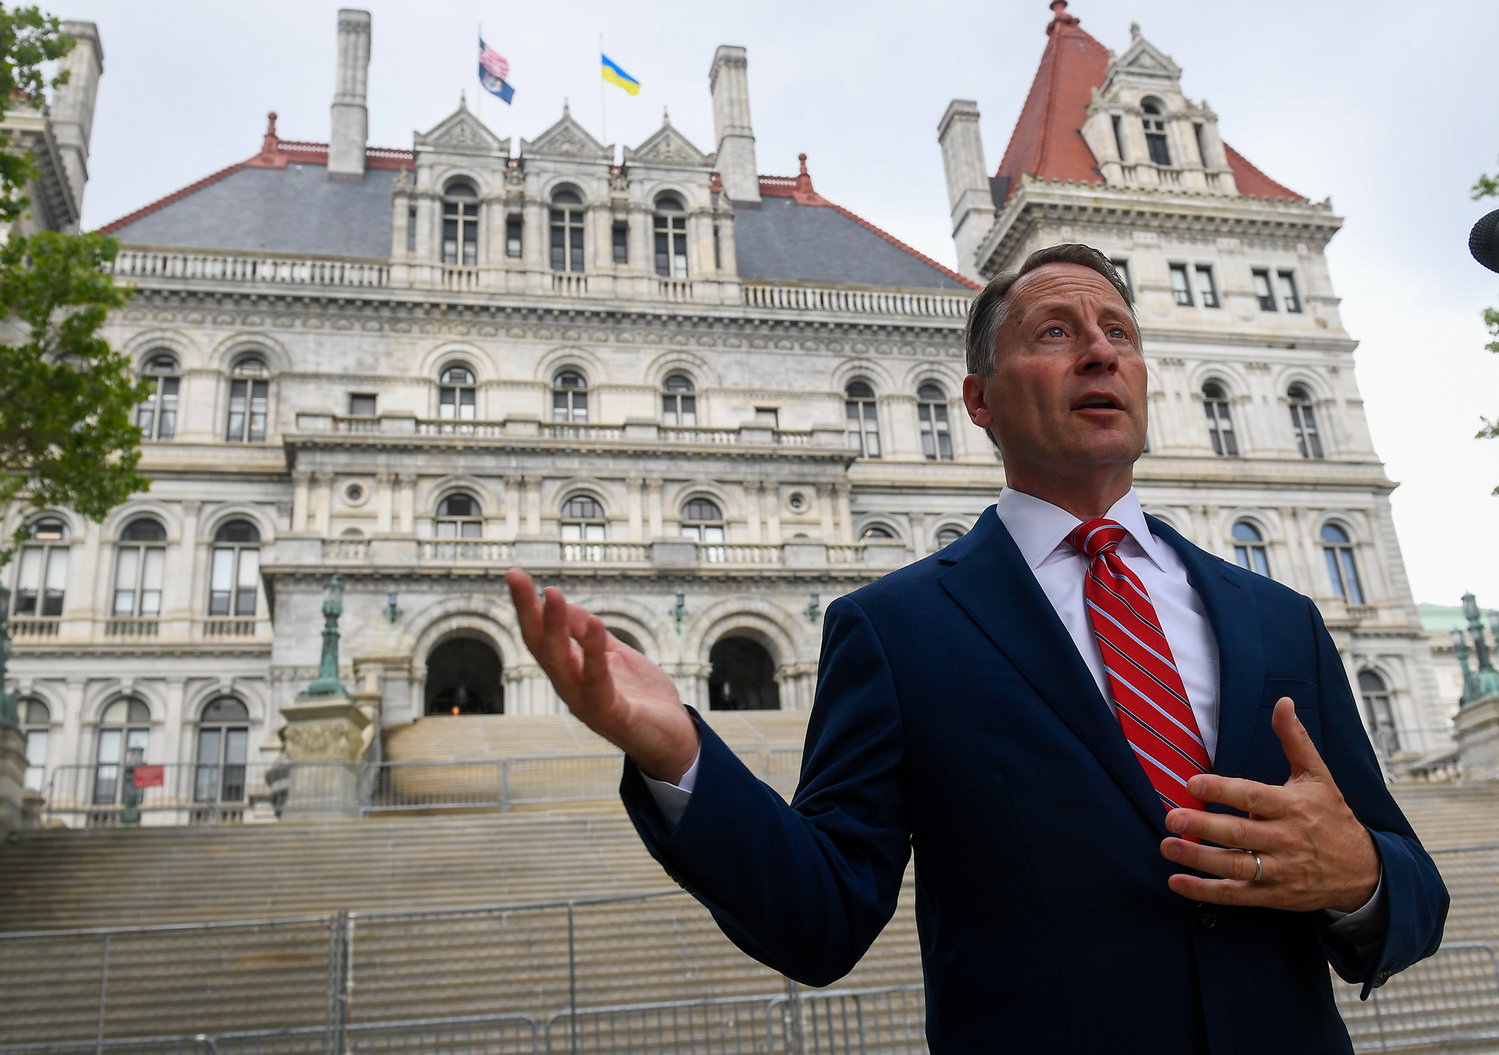 Republican candidate for New York Governor Rob Astorino speaks to a reporter about gun laws and election issues outside the state Capitol on the last scheduled day of the 2022 legislative session, Thursday, June 2, 2022, in Albany, N.Y. (AP Photo/Hans Pennink)